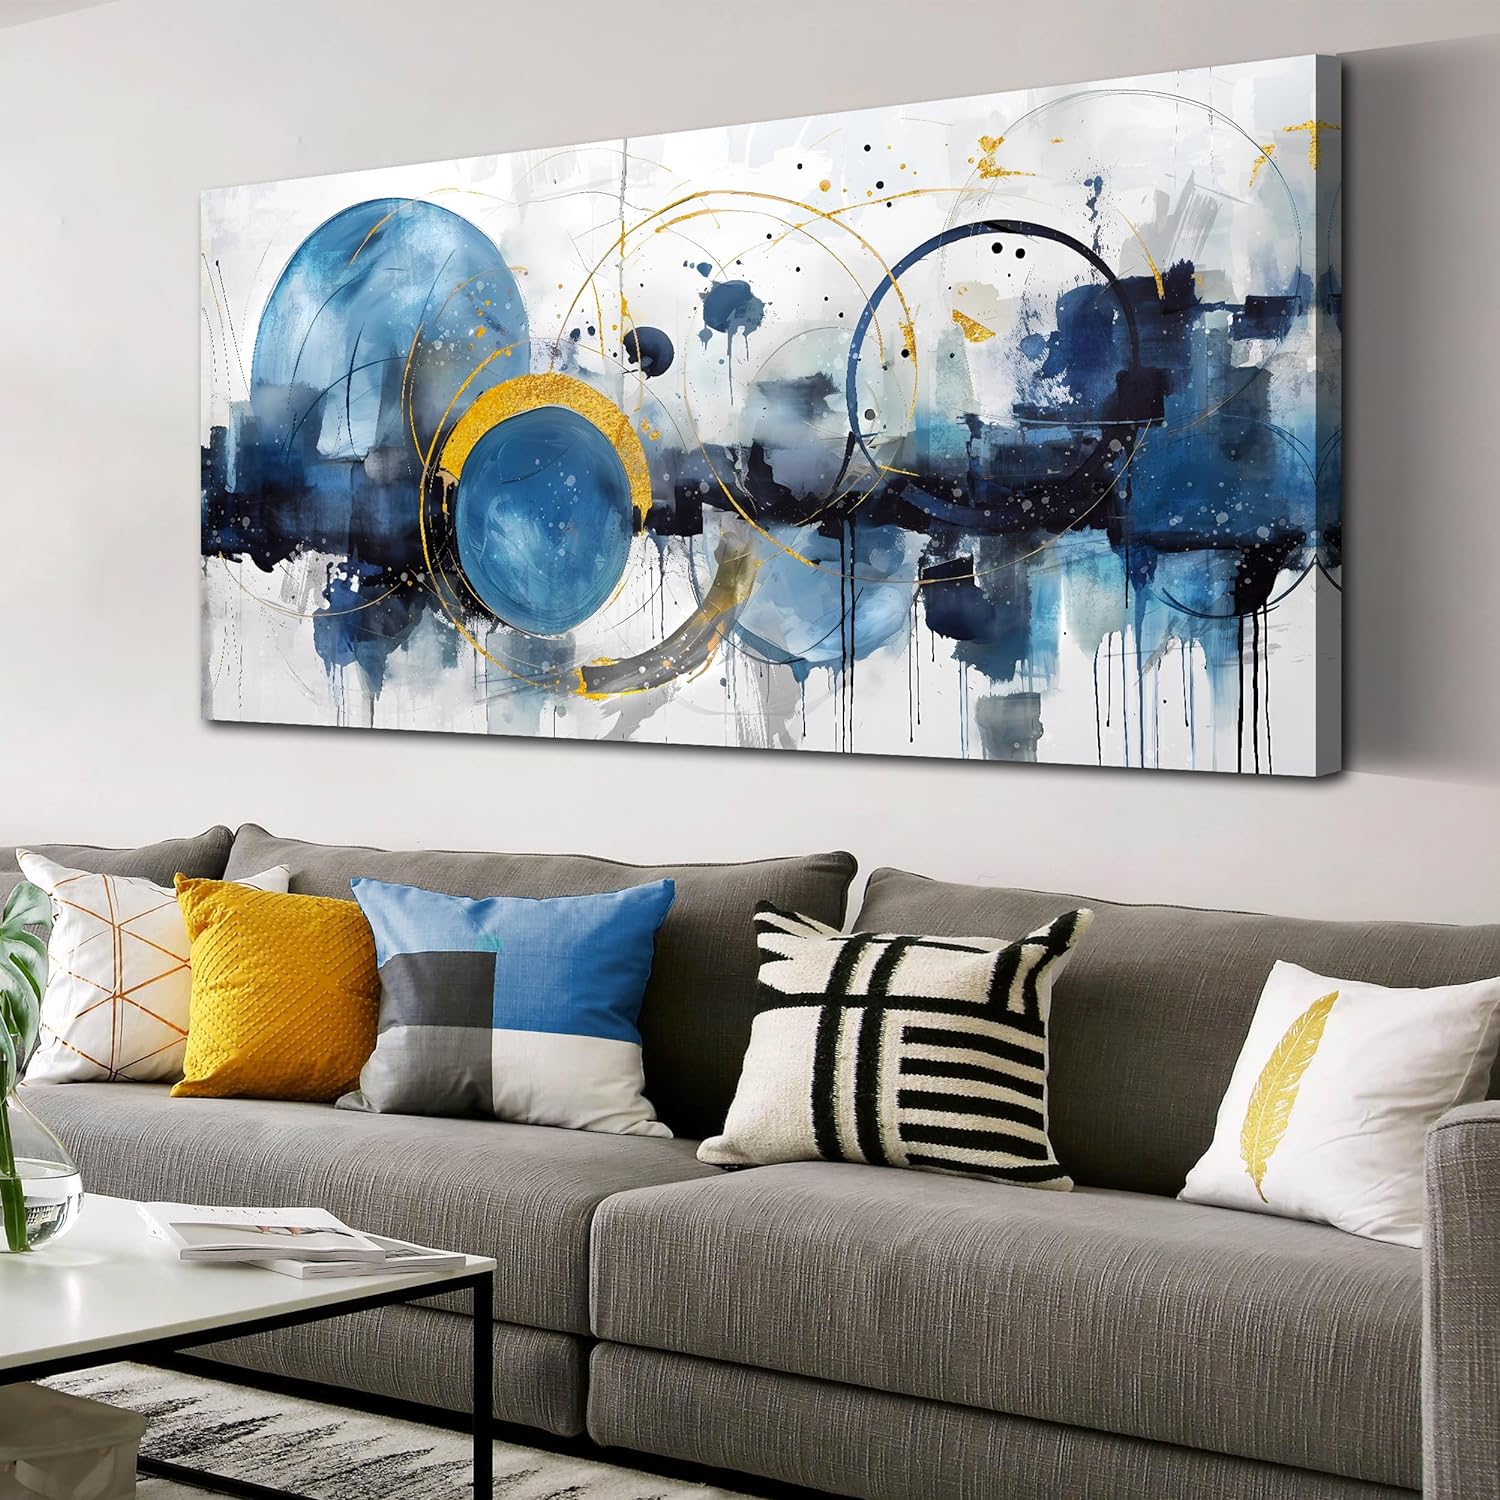 Abstract Canvas Wall-Art - Blue Home Office Wall Decor - Modern Wall Art for Living Room Large Size Ready to Hang Size 24 x 48